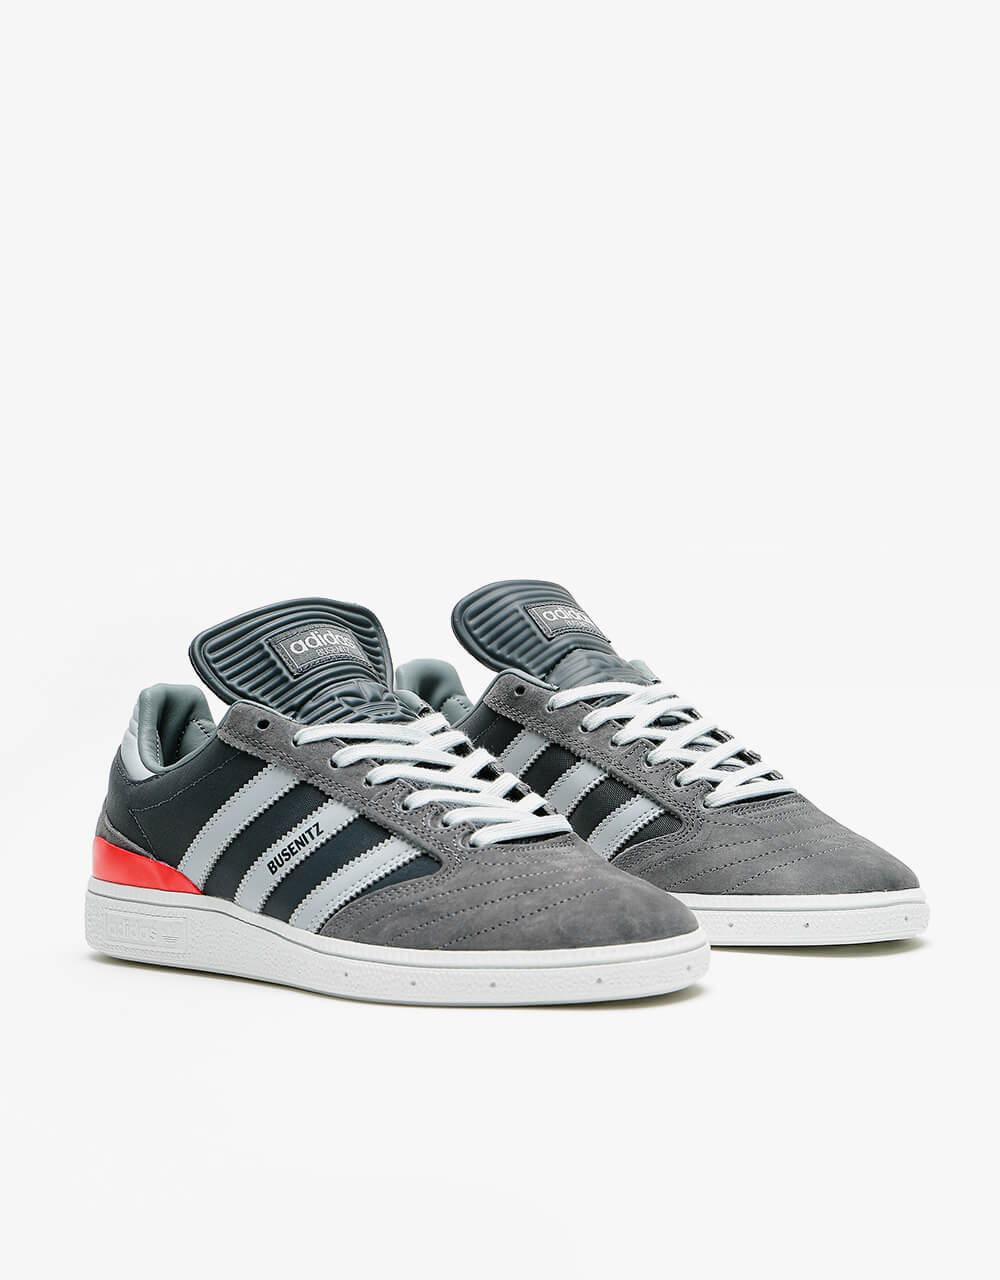 adidas Pro Skate Shoes - Granite/Clear Onix/Dark Grey – Route One